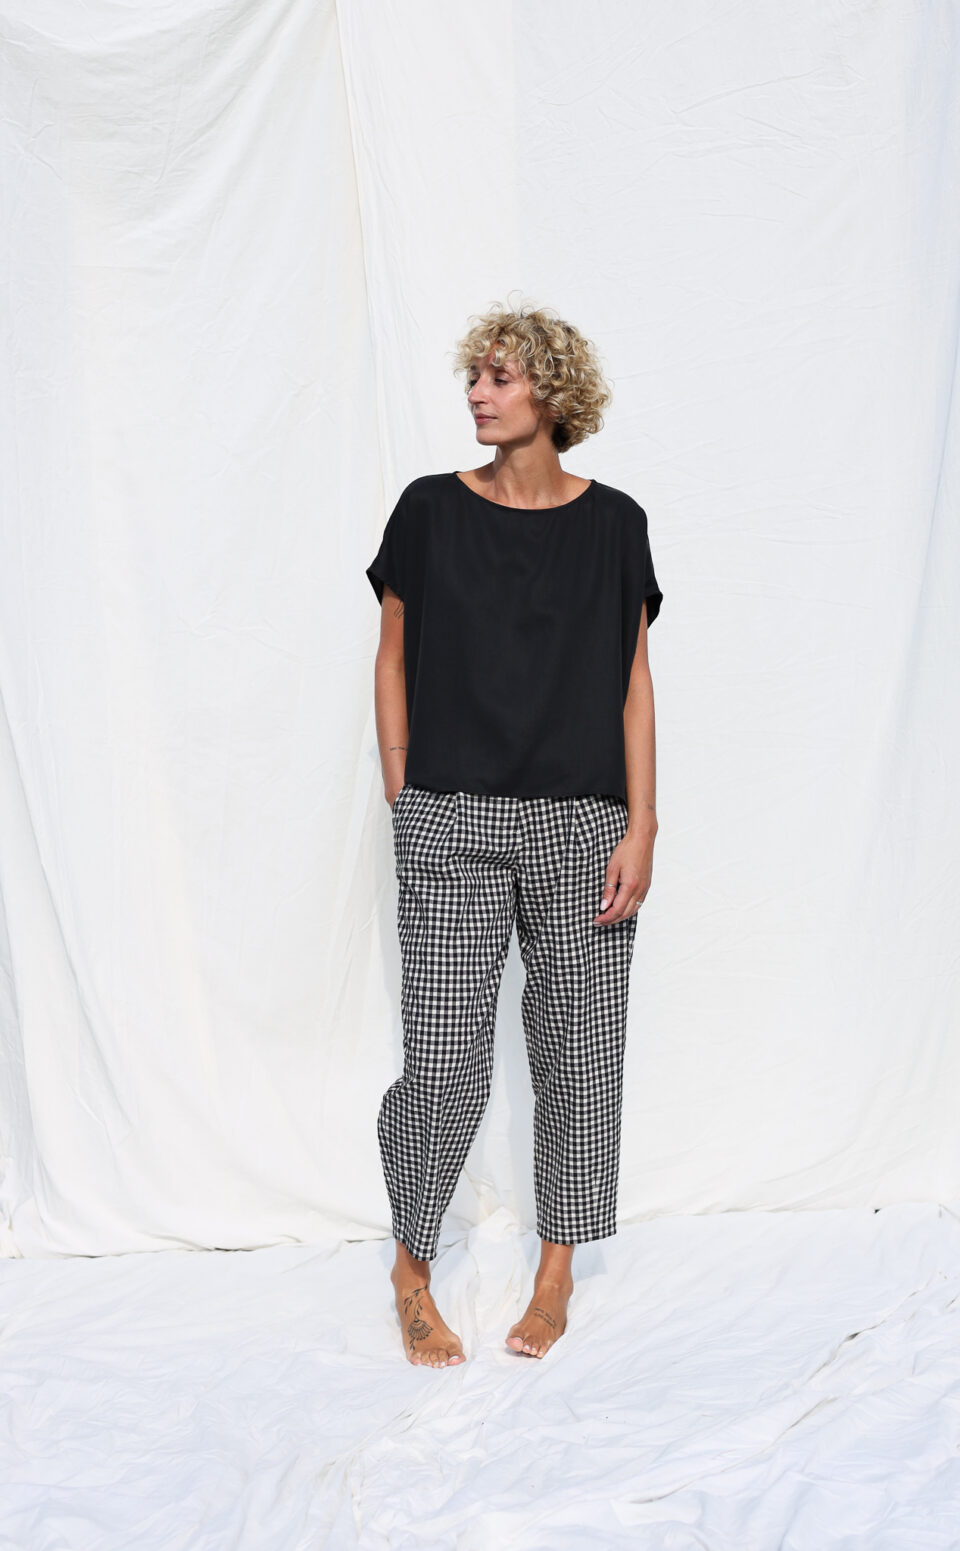 Gingham boxy seersucker cotton trousers | Trousers | Sustainable clothing | OffOn clothing